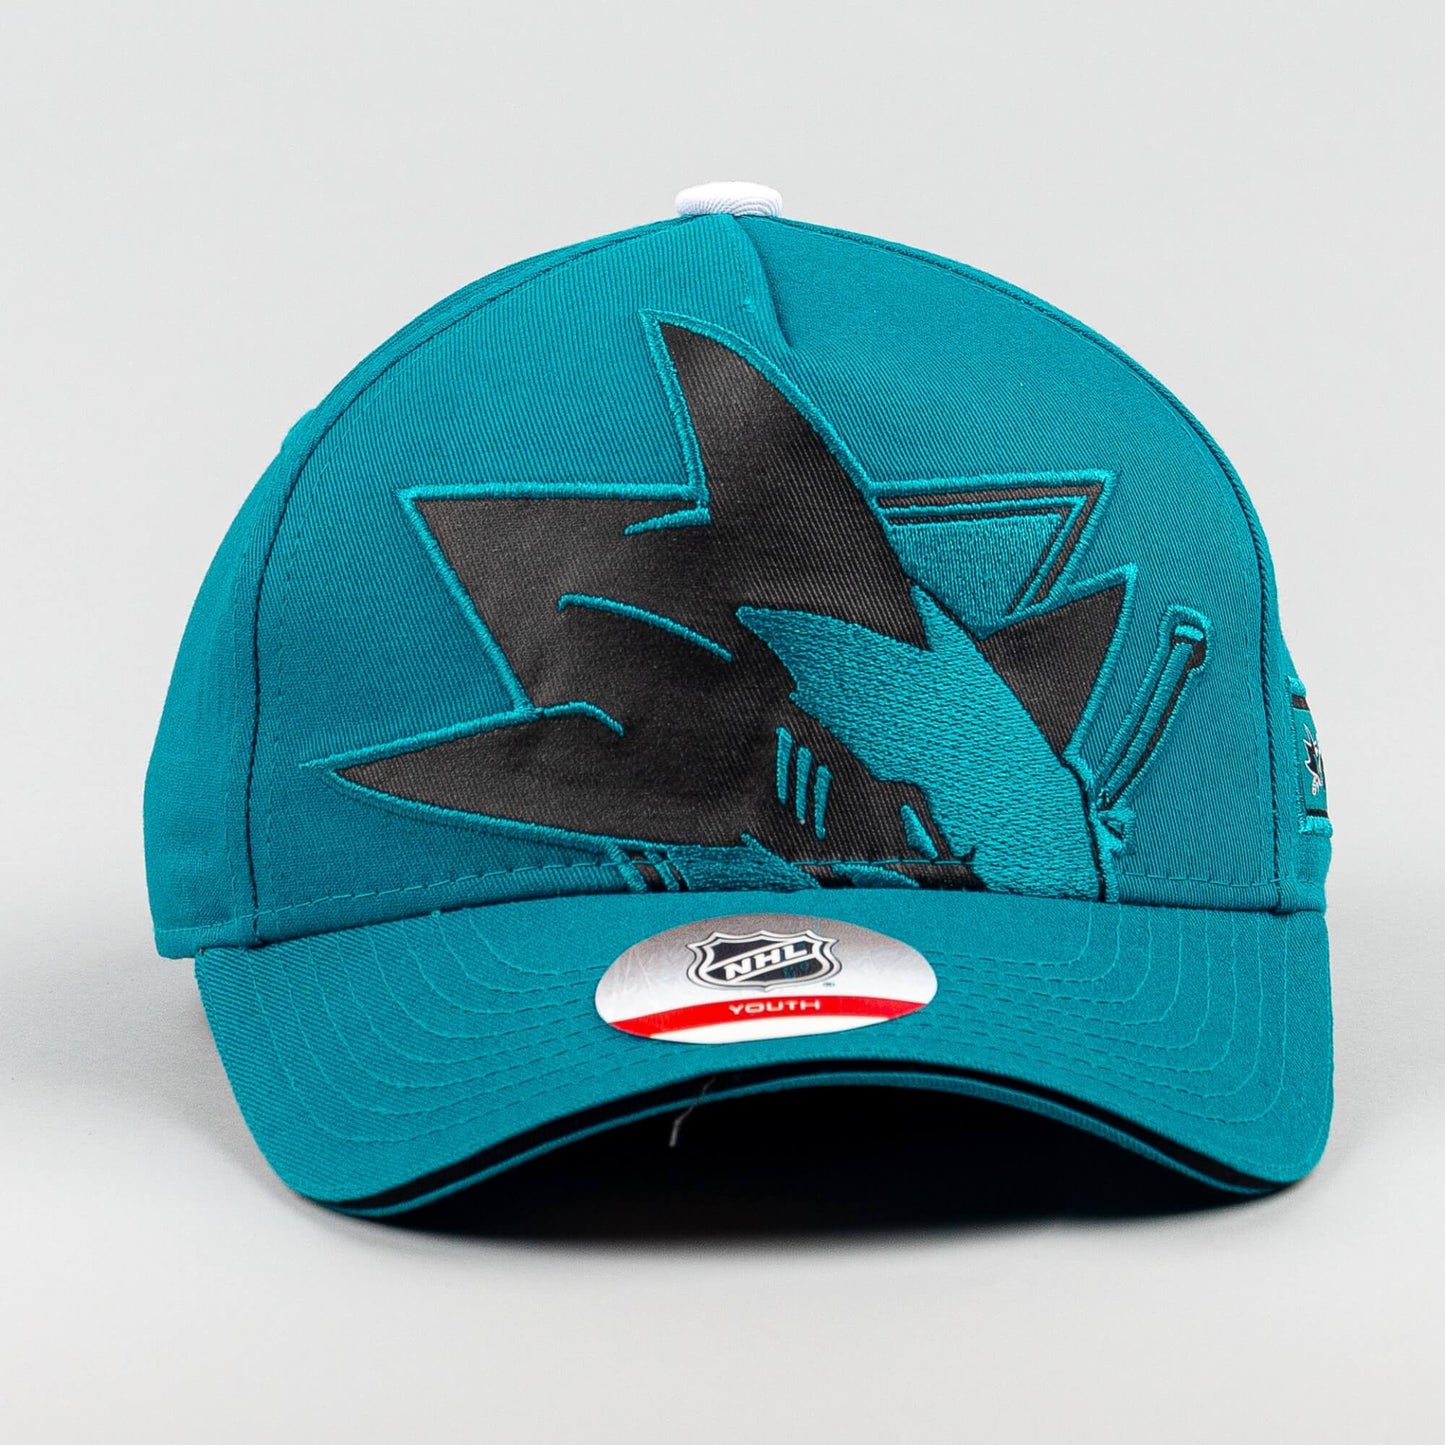 Outer Stuff NHL Big-Face Precurved Snap Sharks Turquoise